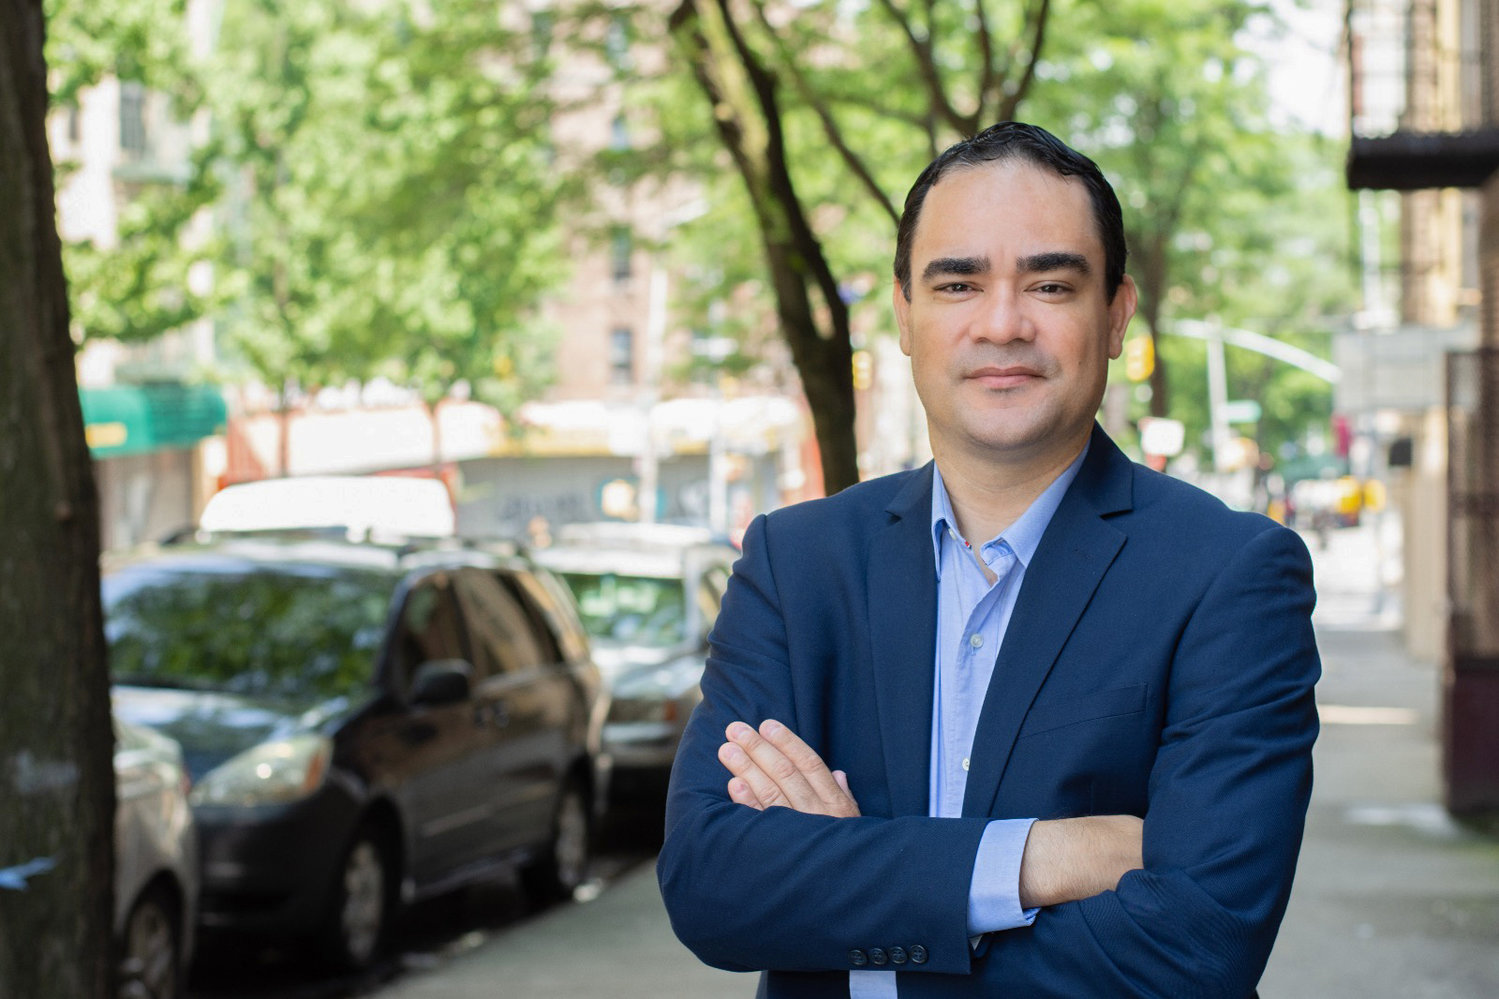 A former candidate for Assembly and director of Hands on New York, Haile Rivera is one of five candidates gunning for Fernando Cabrera’s city council seat in the 2021 citywide elections.